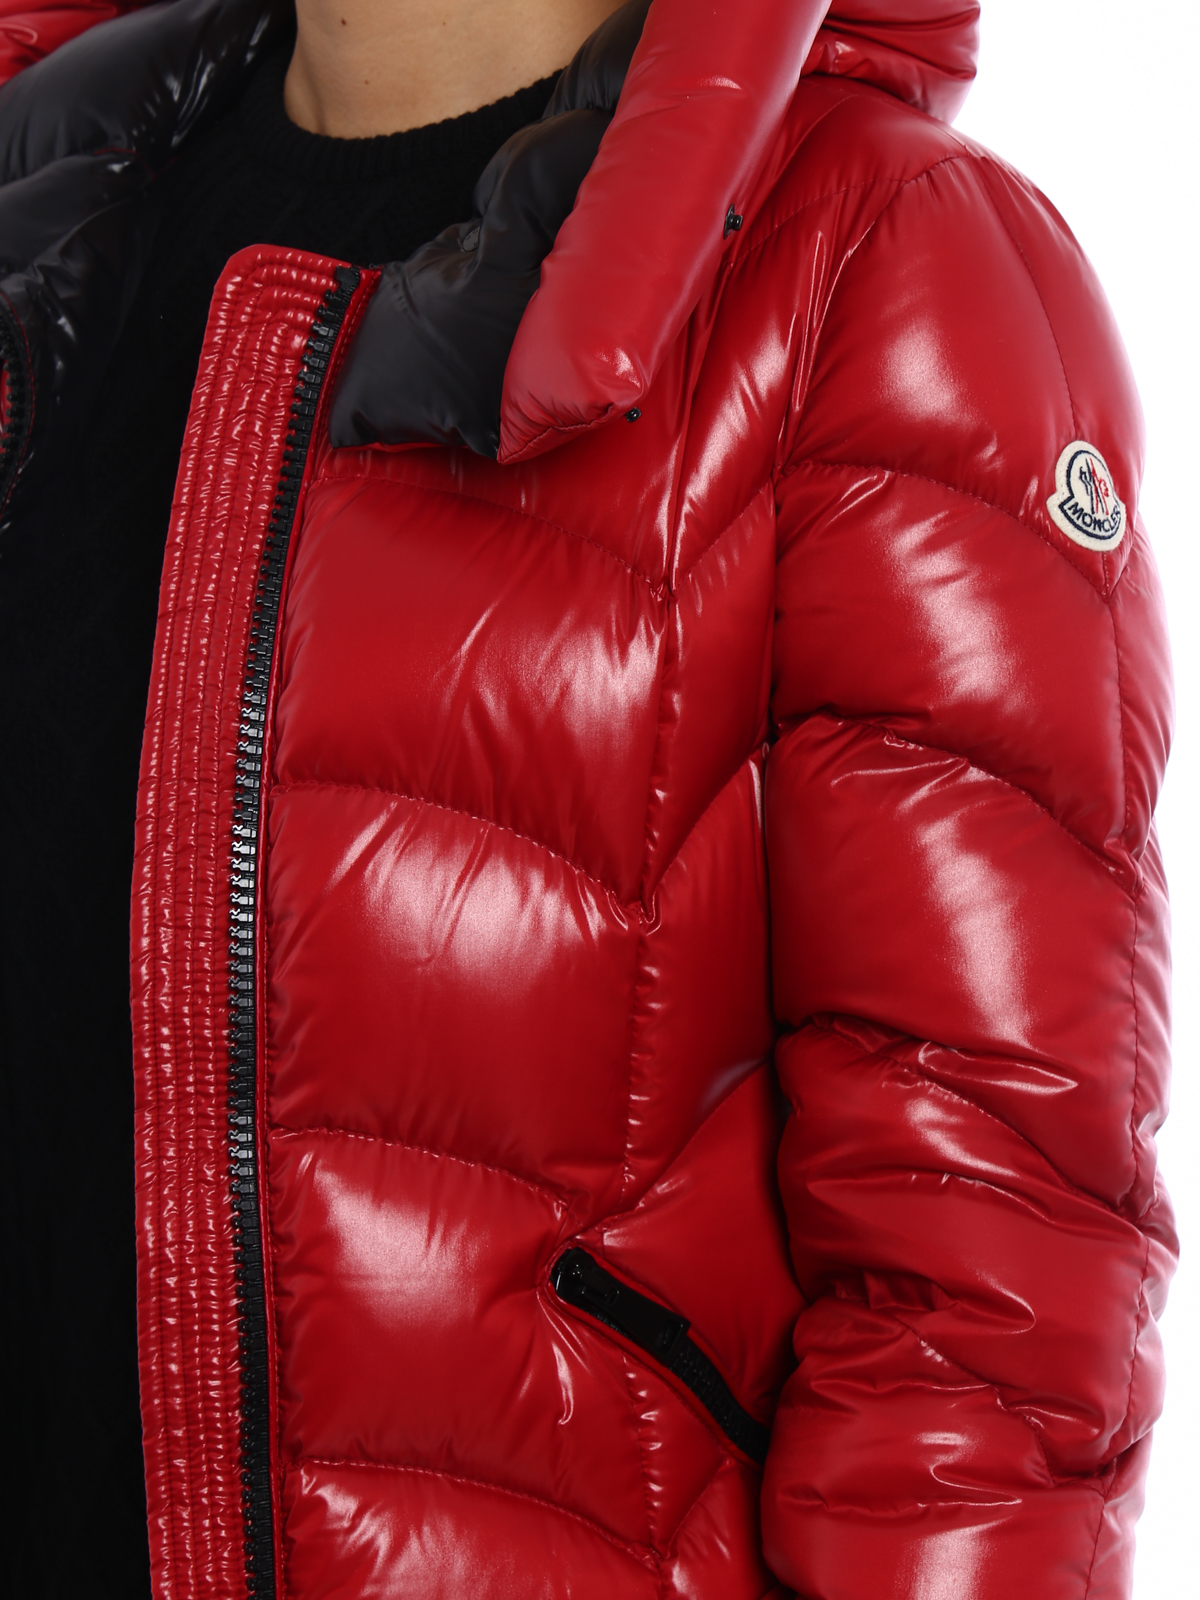 Padded jackets Moncler - Akebia glossy puffer hooded jacket -  C2093469480568950462